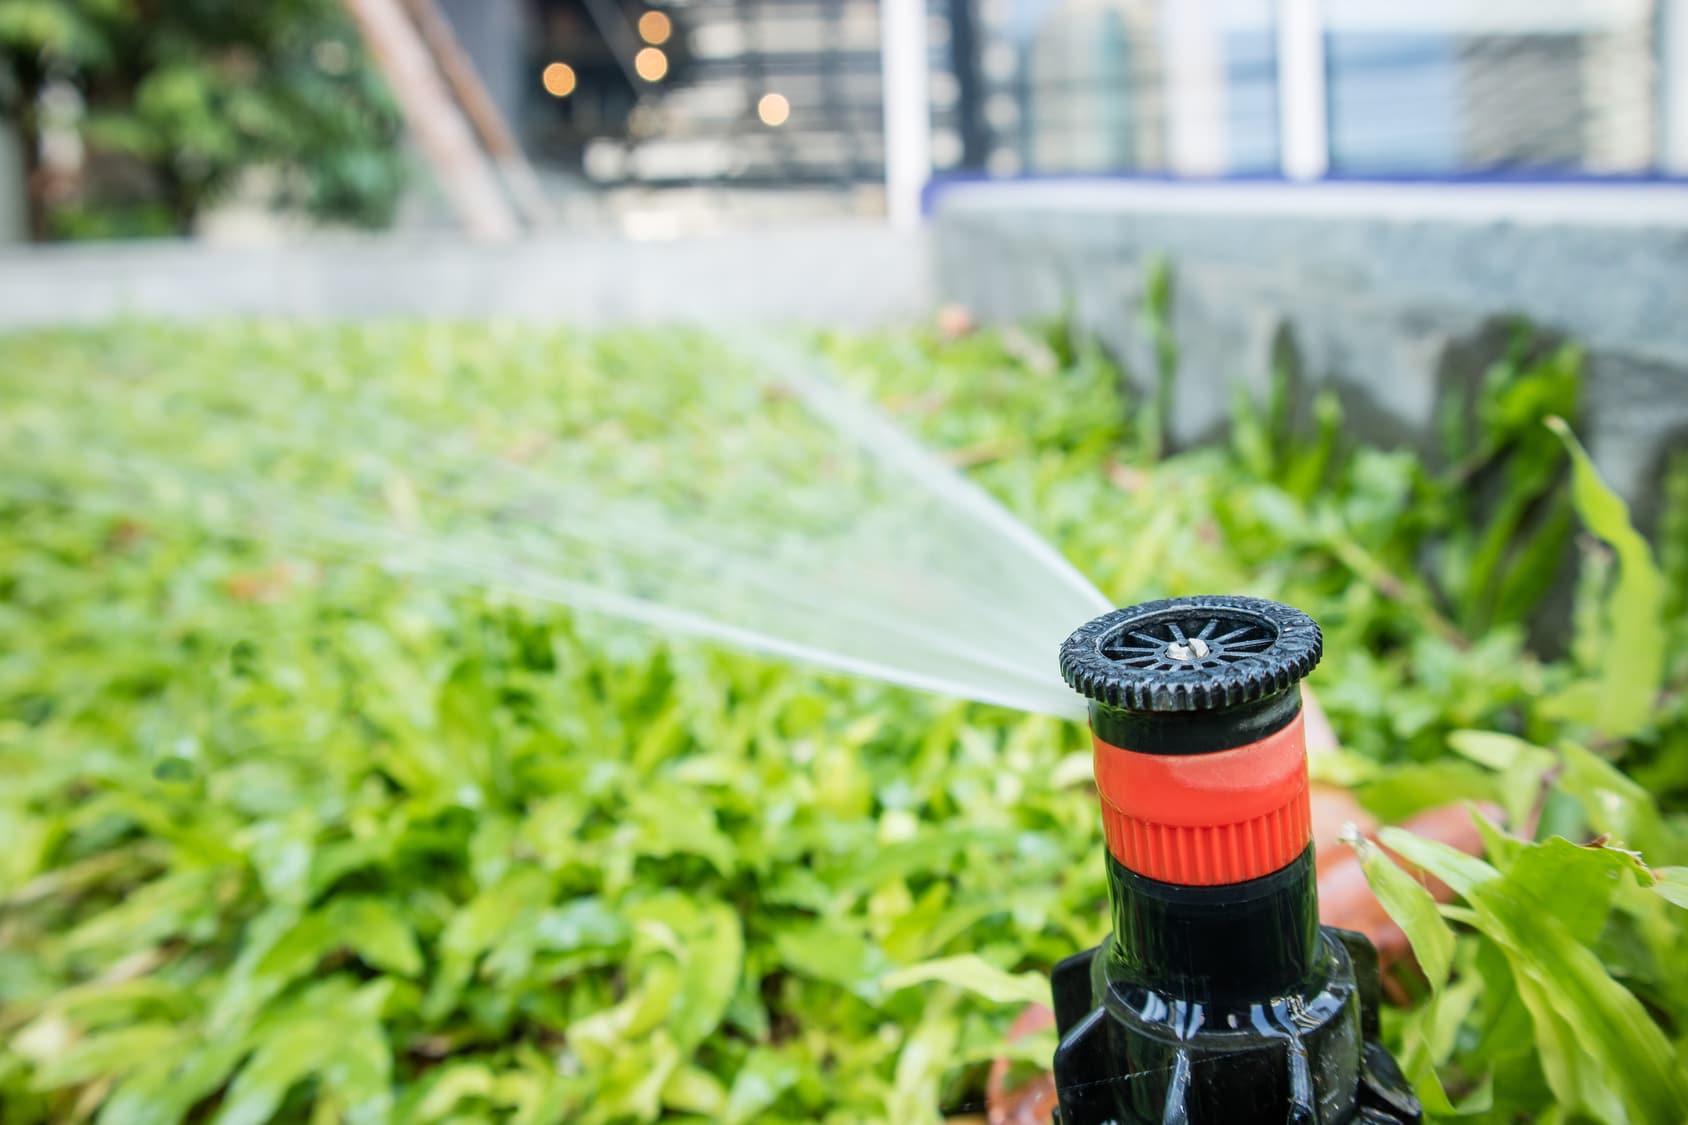 Getting The Best Sprinkler Heads For Your Perth Lawn